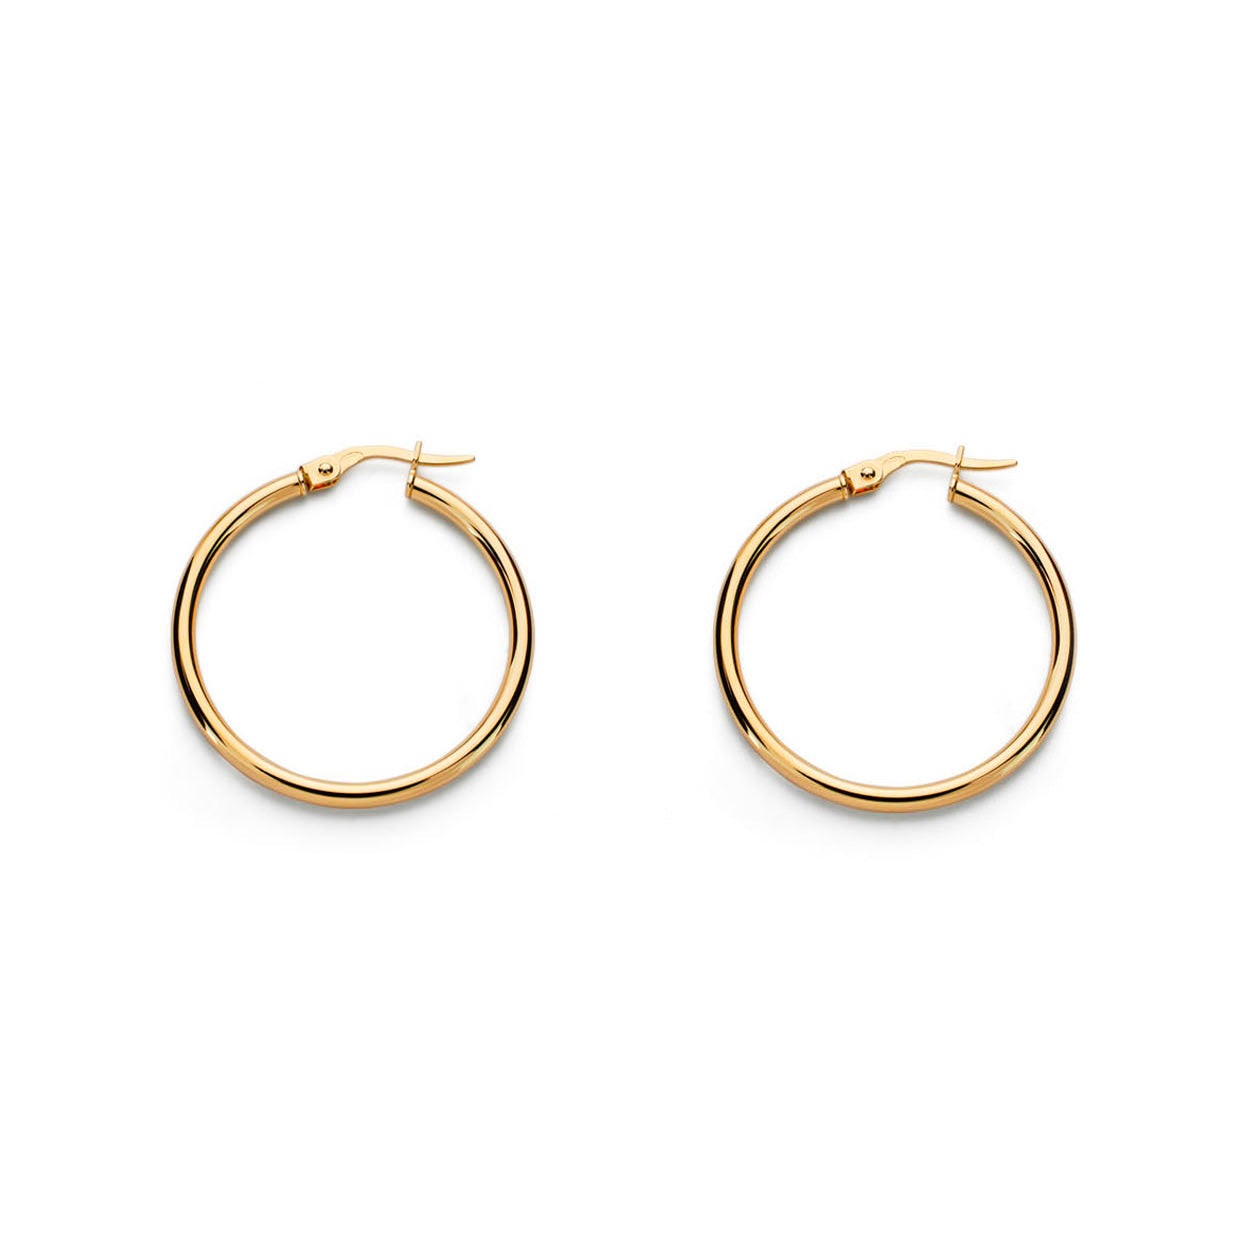 9K Yellow Gold Earrings Round Shiny Hoops 33 x 2 mm